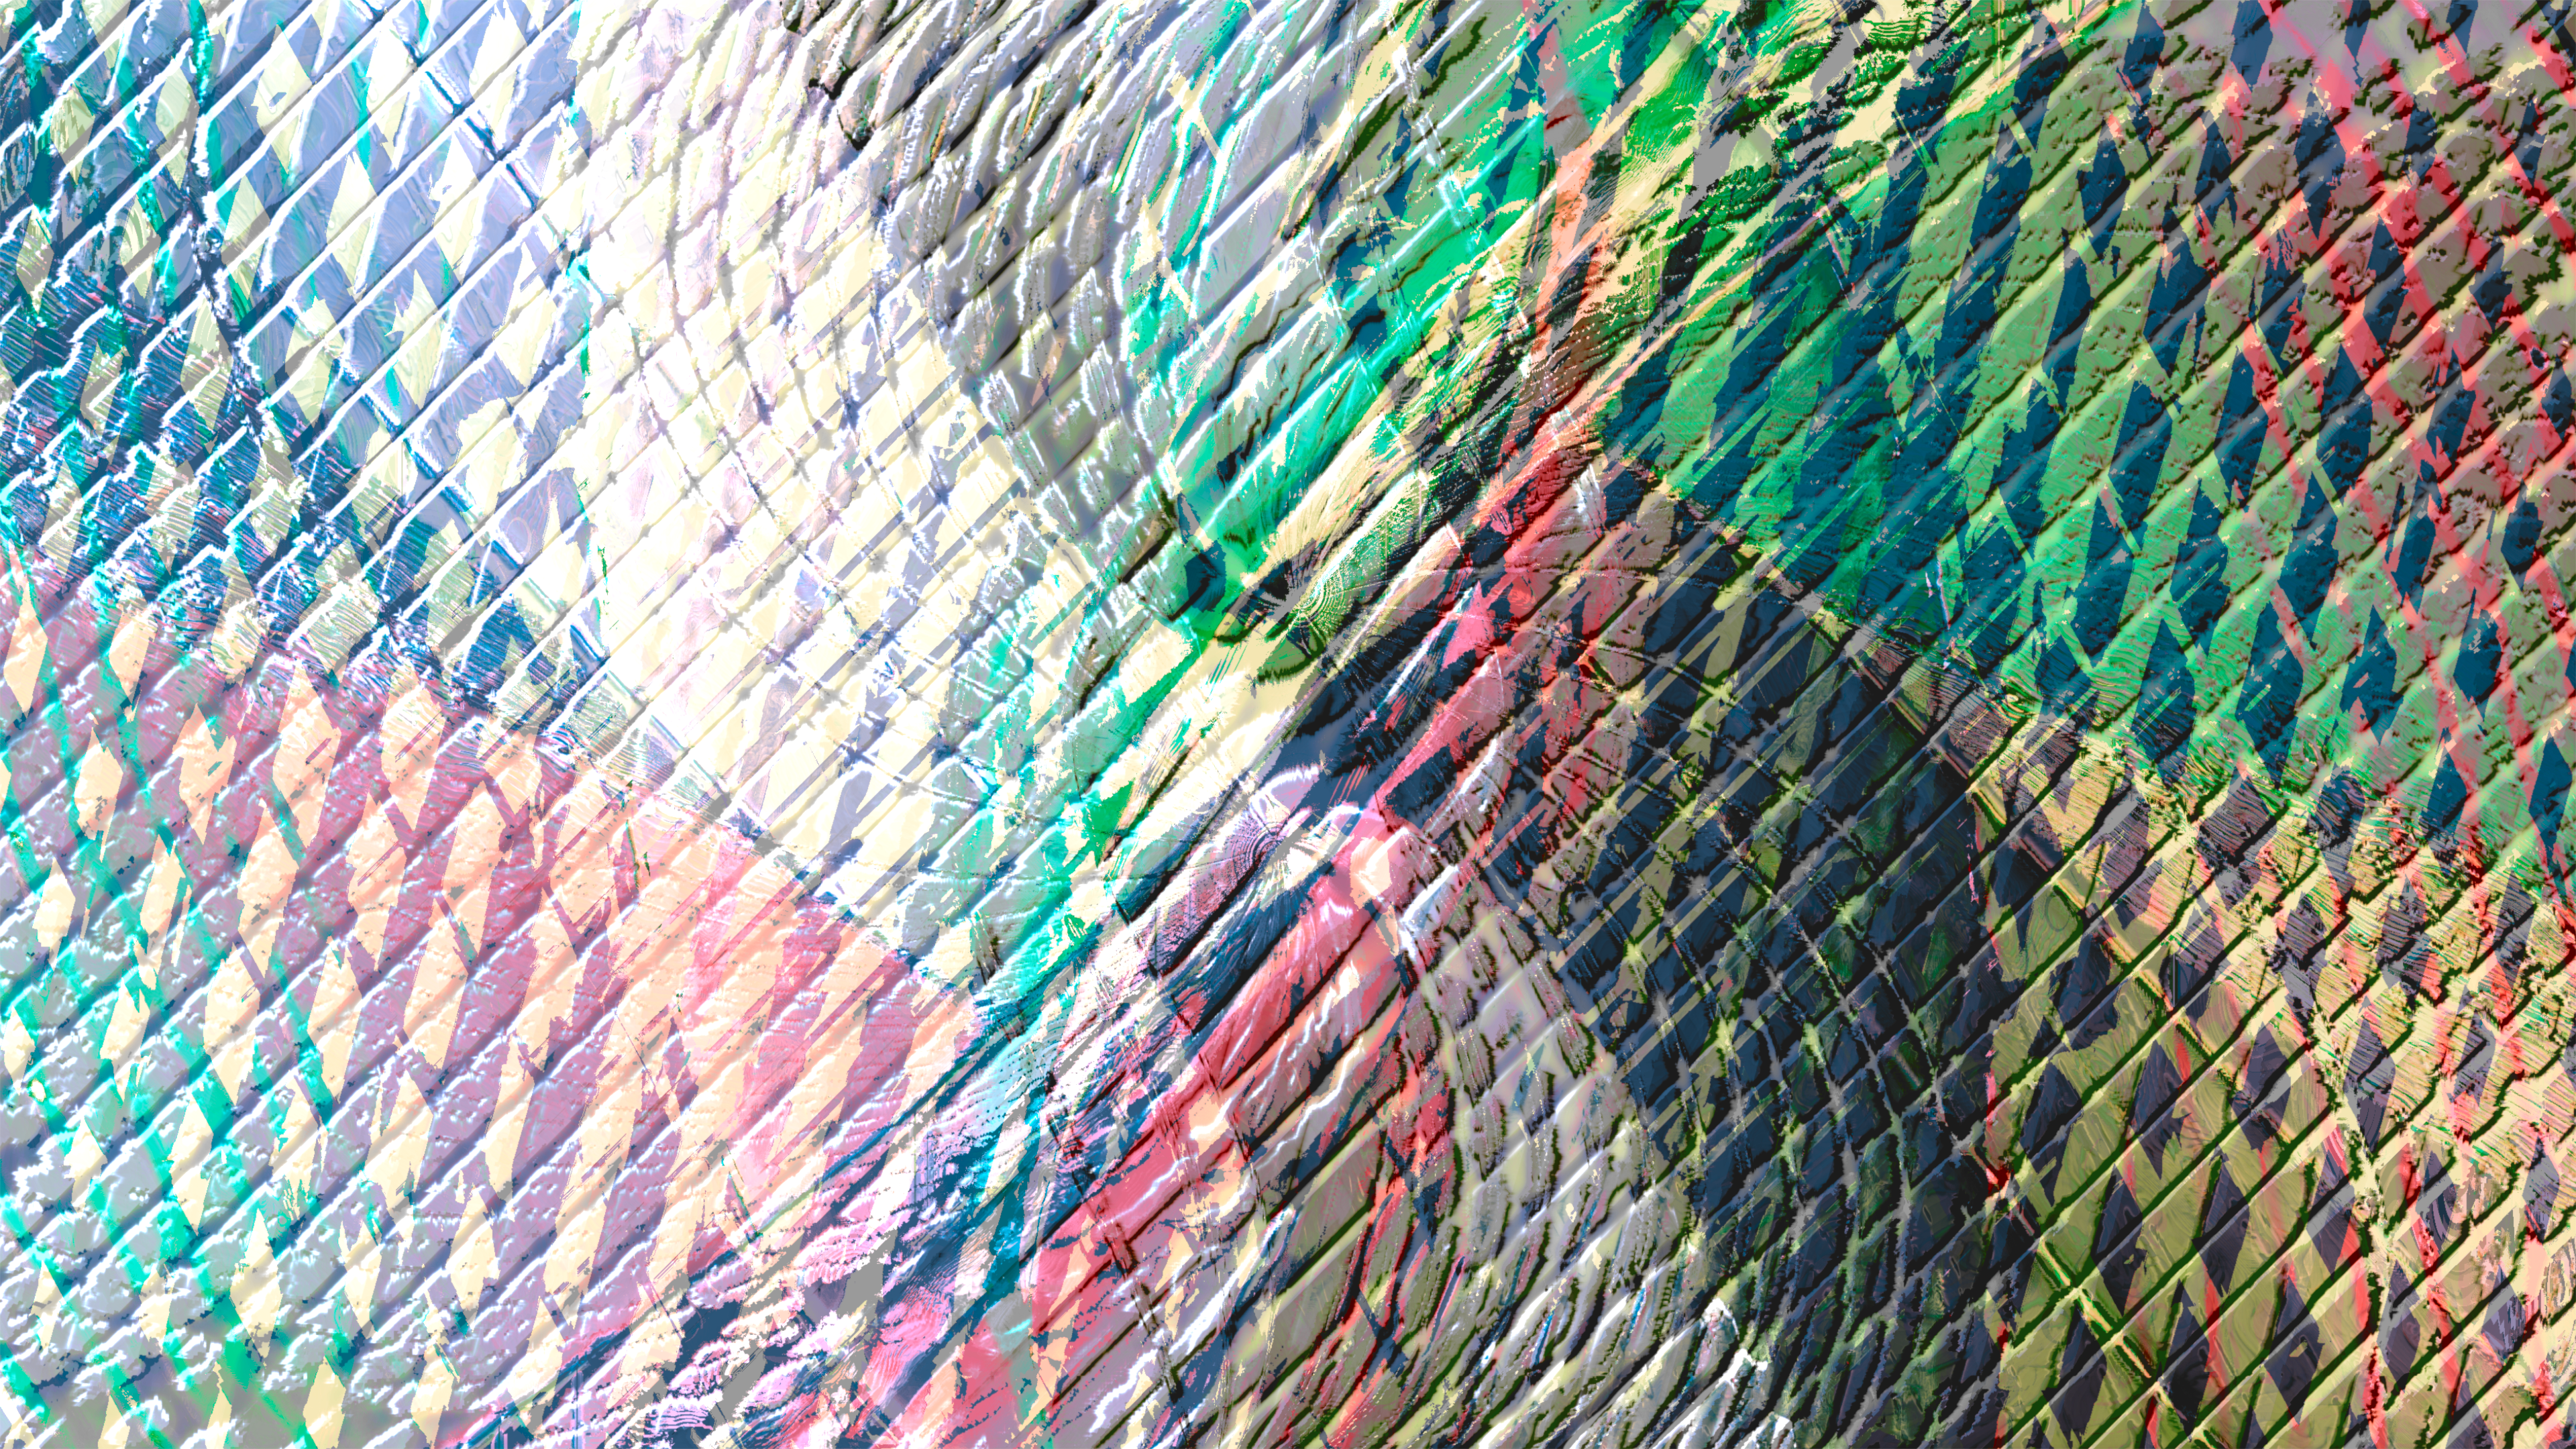 General 3840x2160 colorful abstract contrast